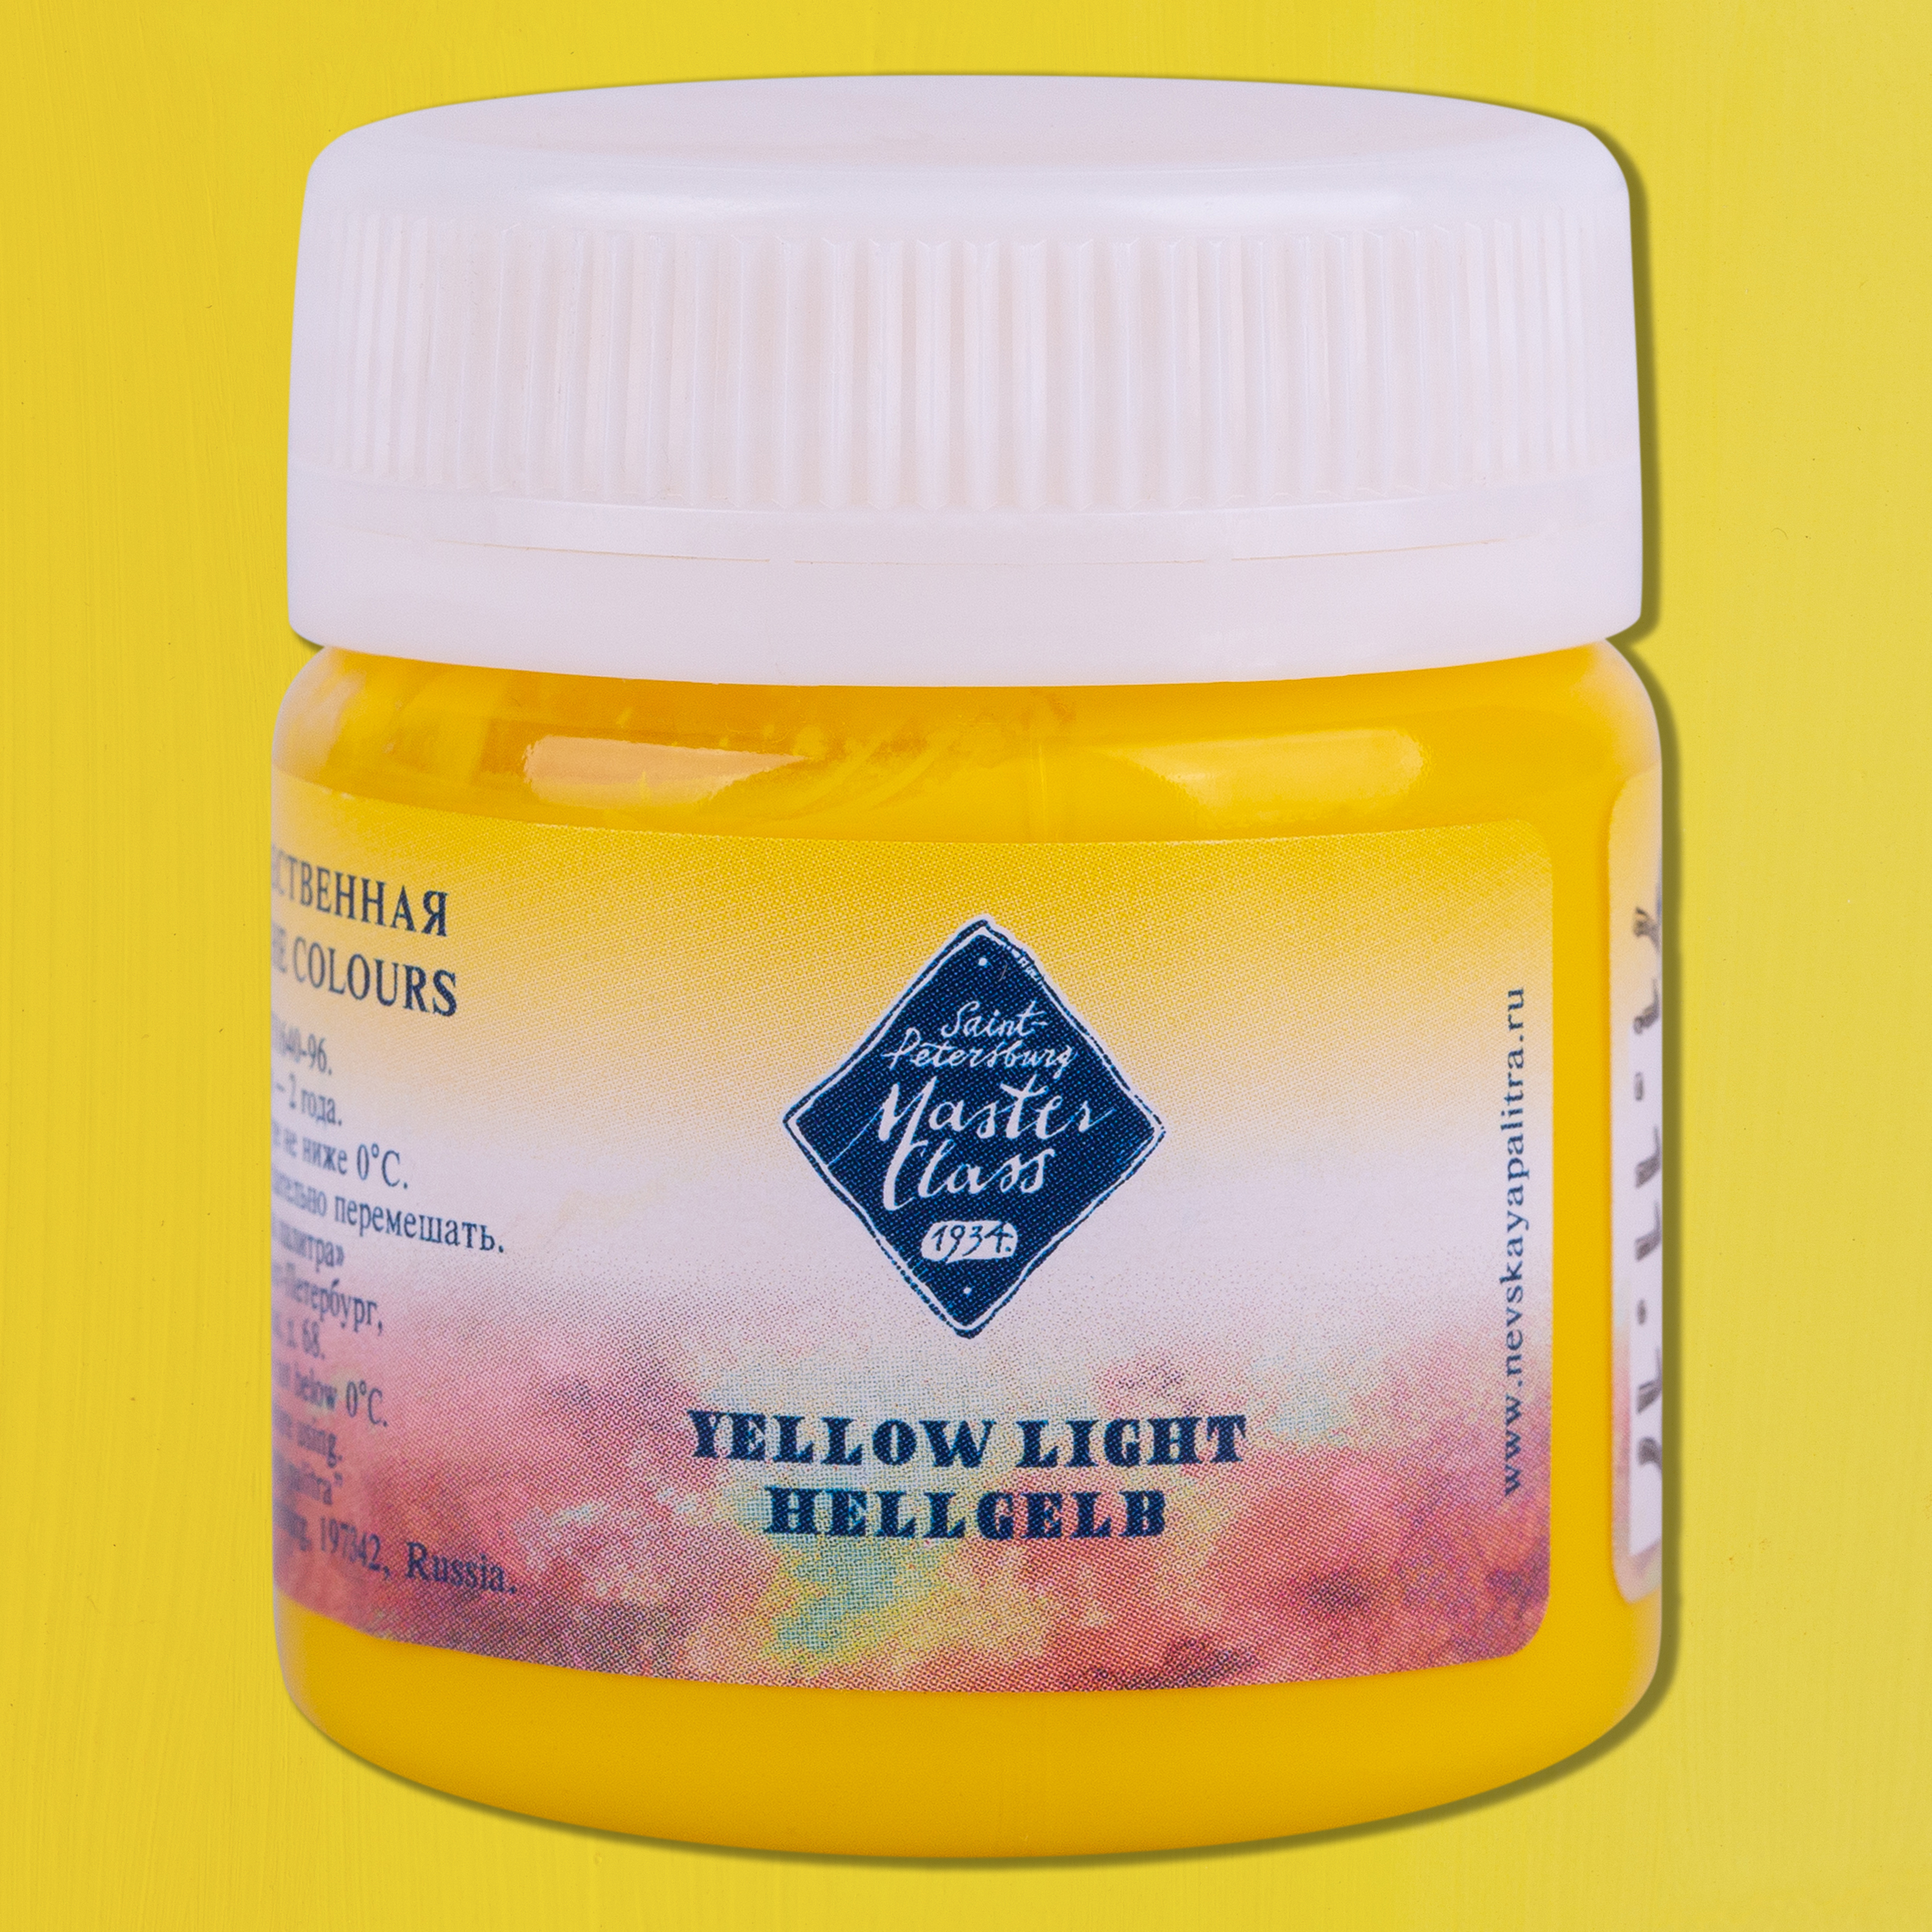 Yellow light "Master Class" in the jar. № 213